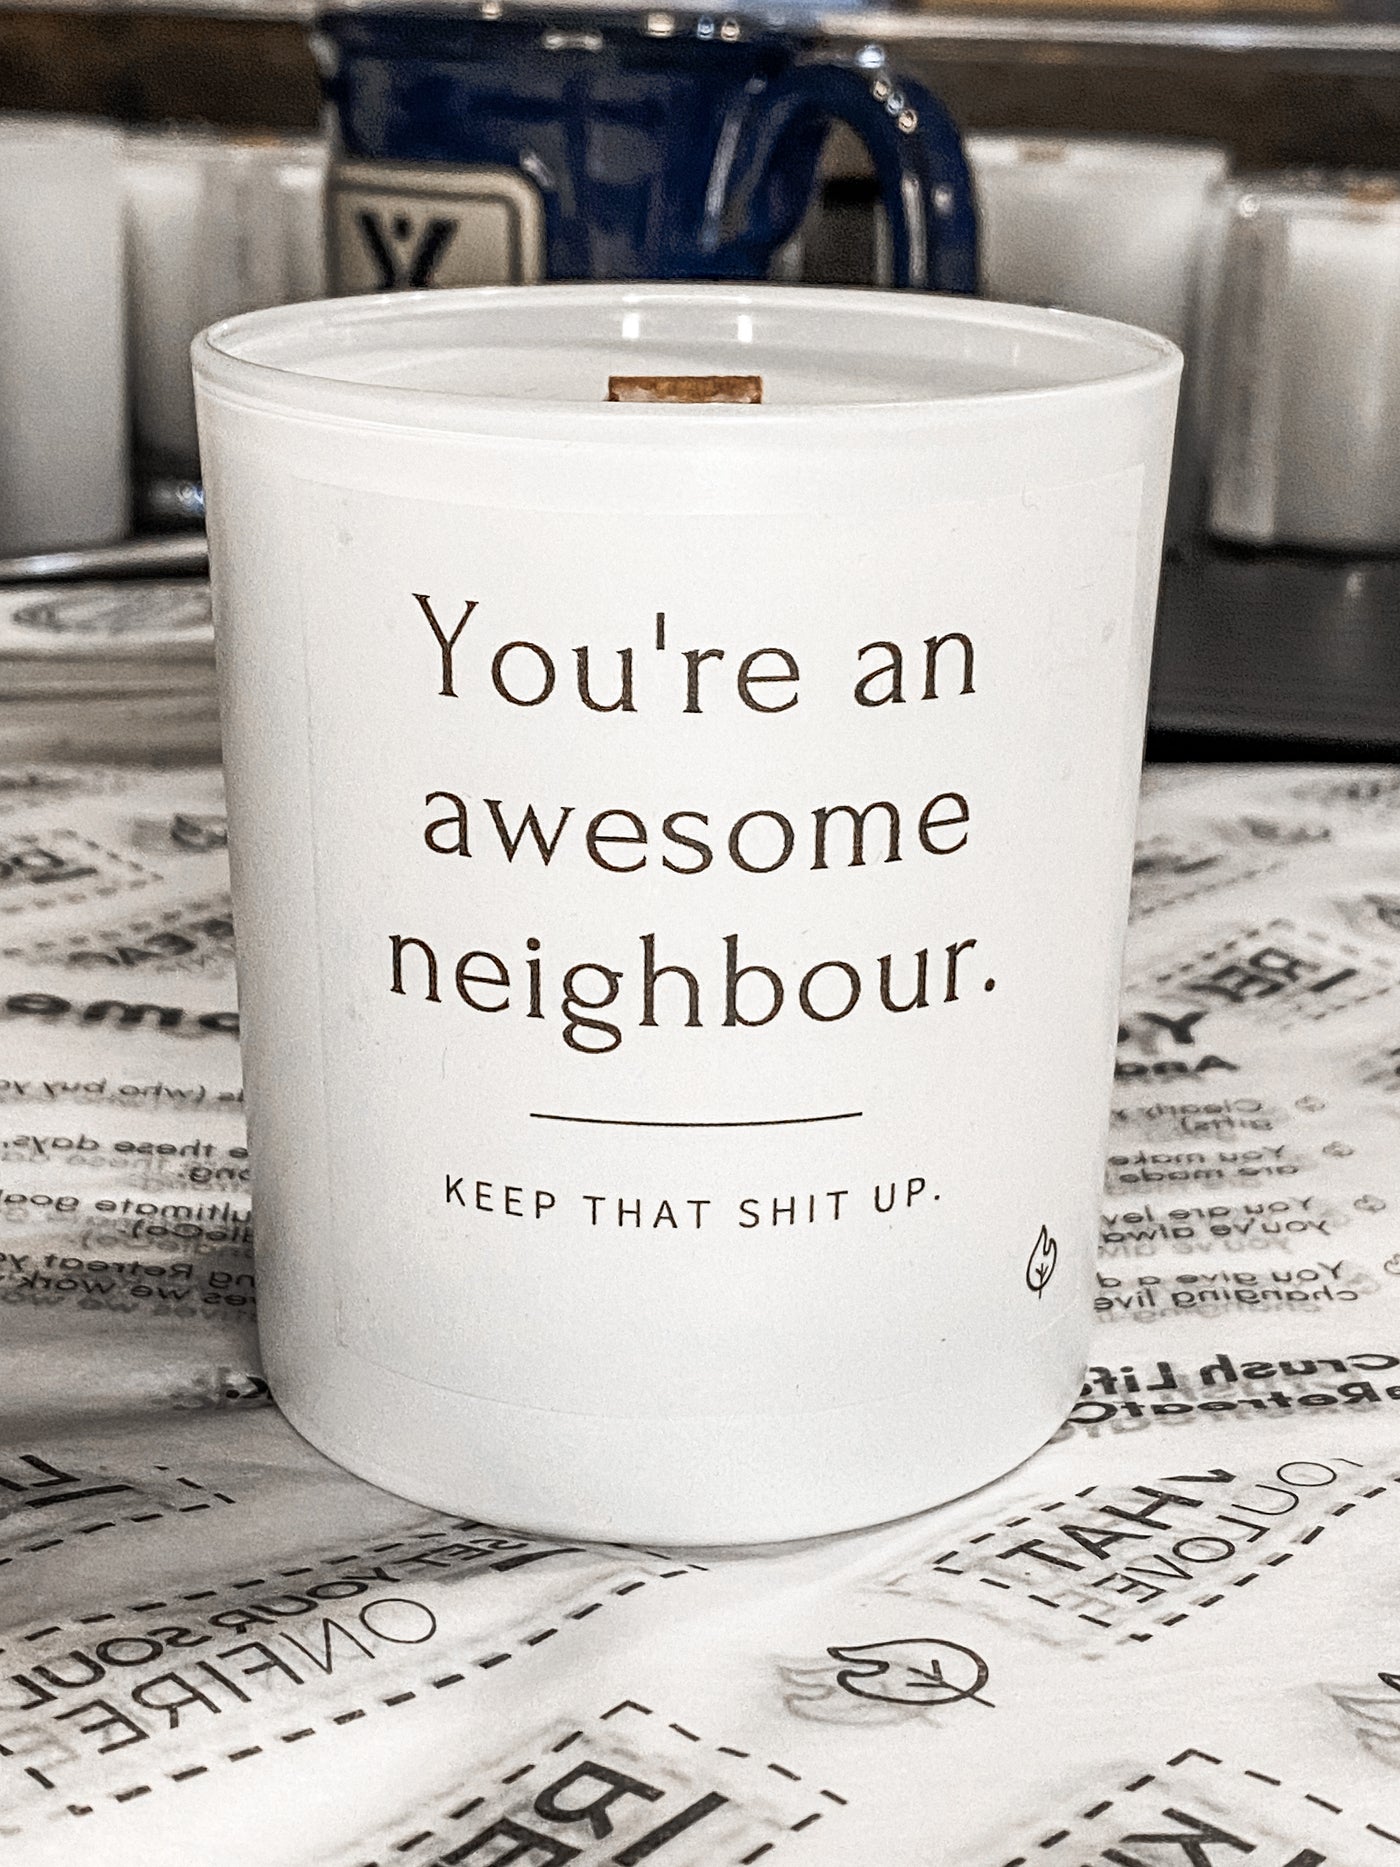 The Neighbour Candle